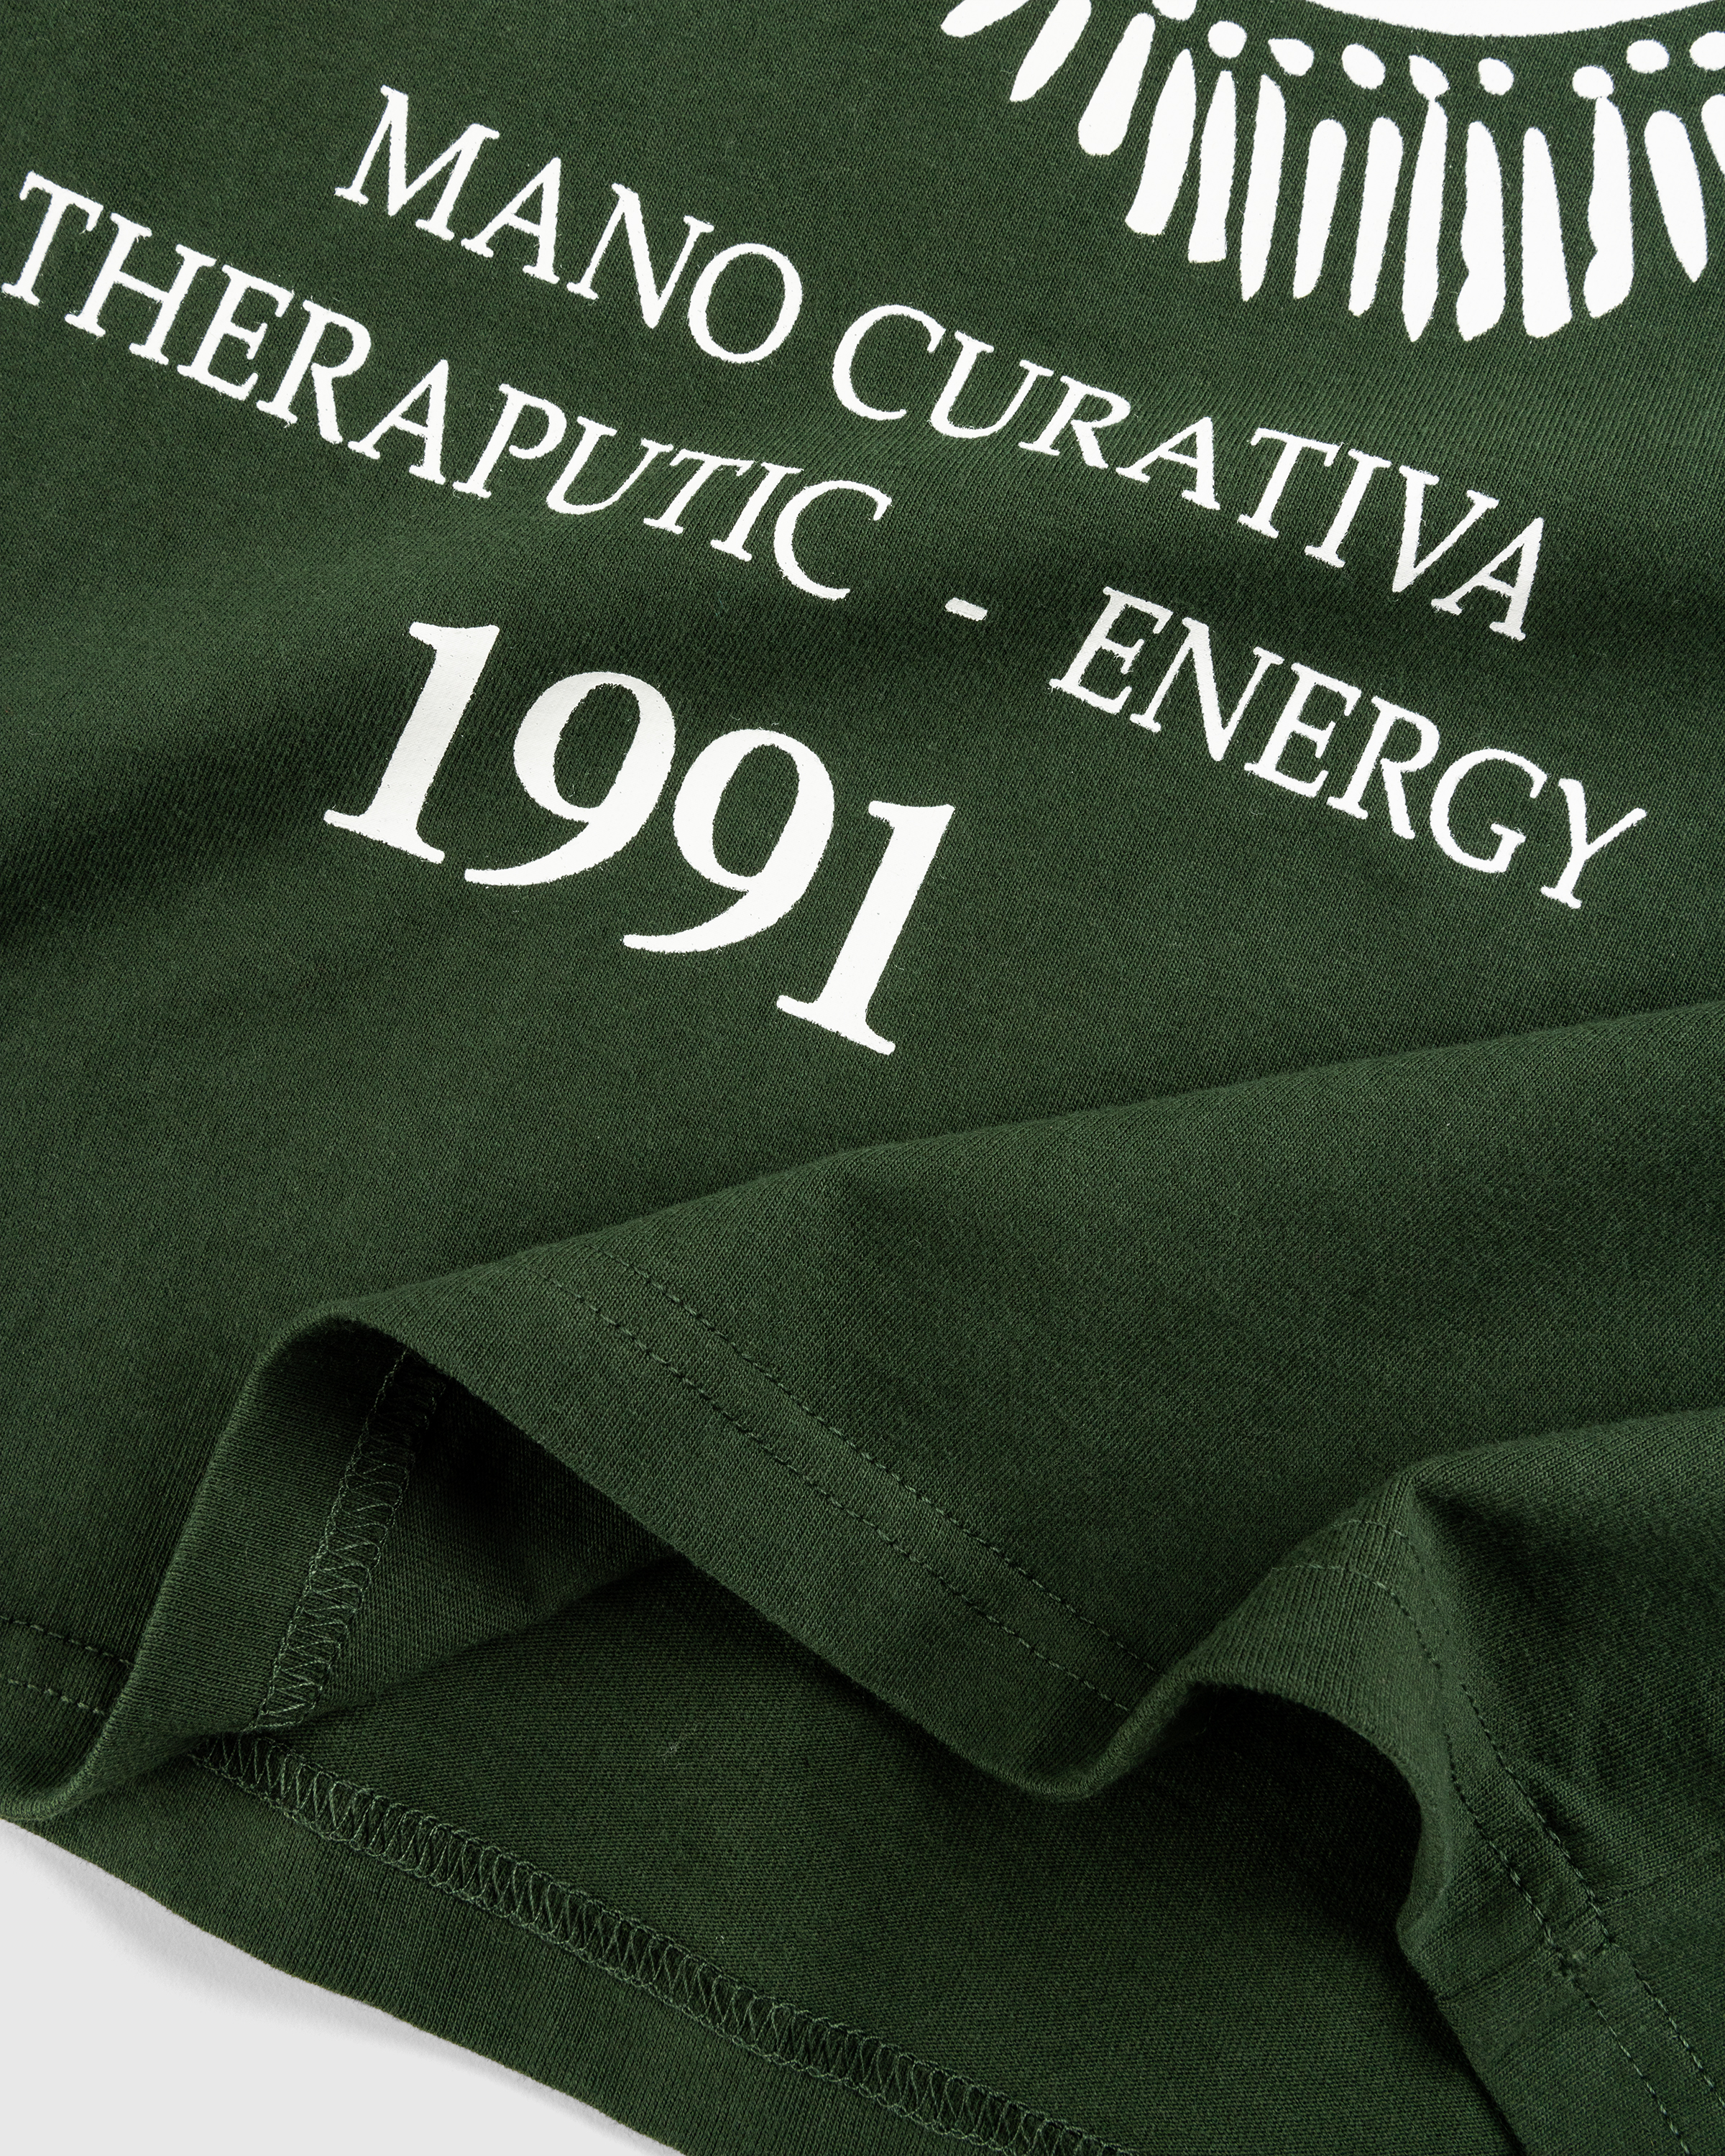 Museum of Peace & Quiet – Mano Curativa T-Shirt Forest - T-Shirts - Green - Image 7